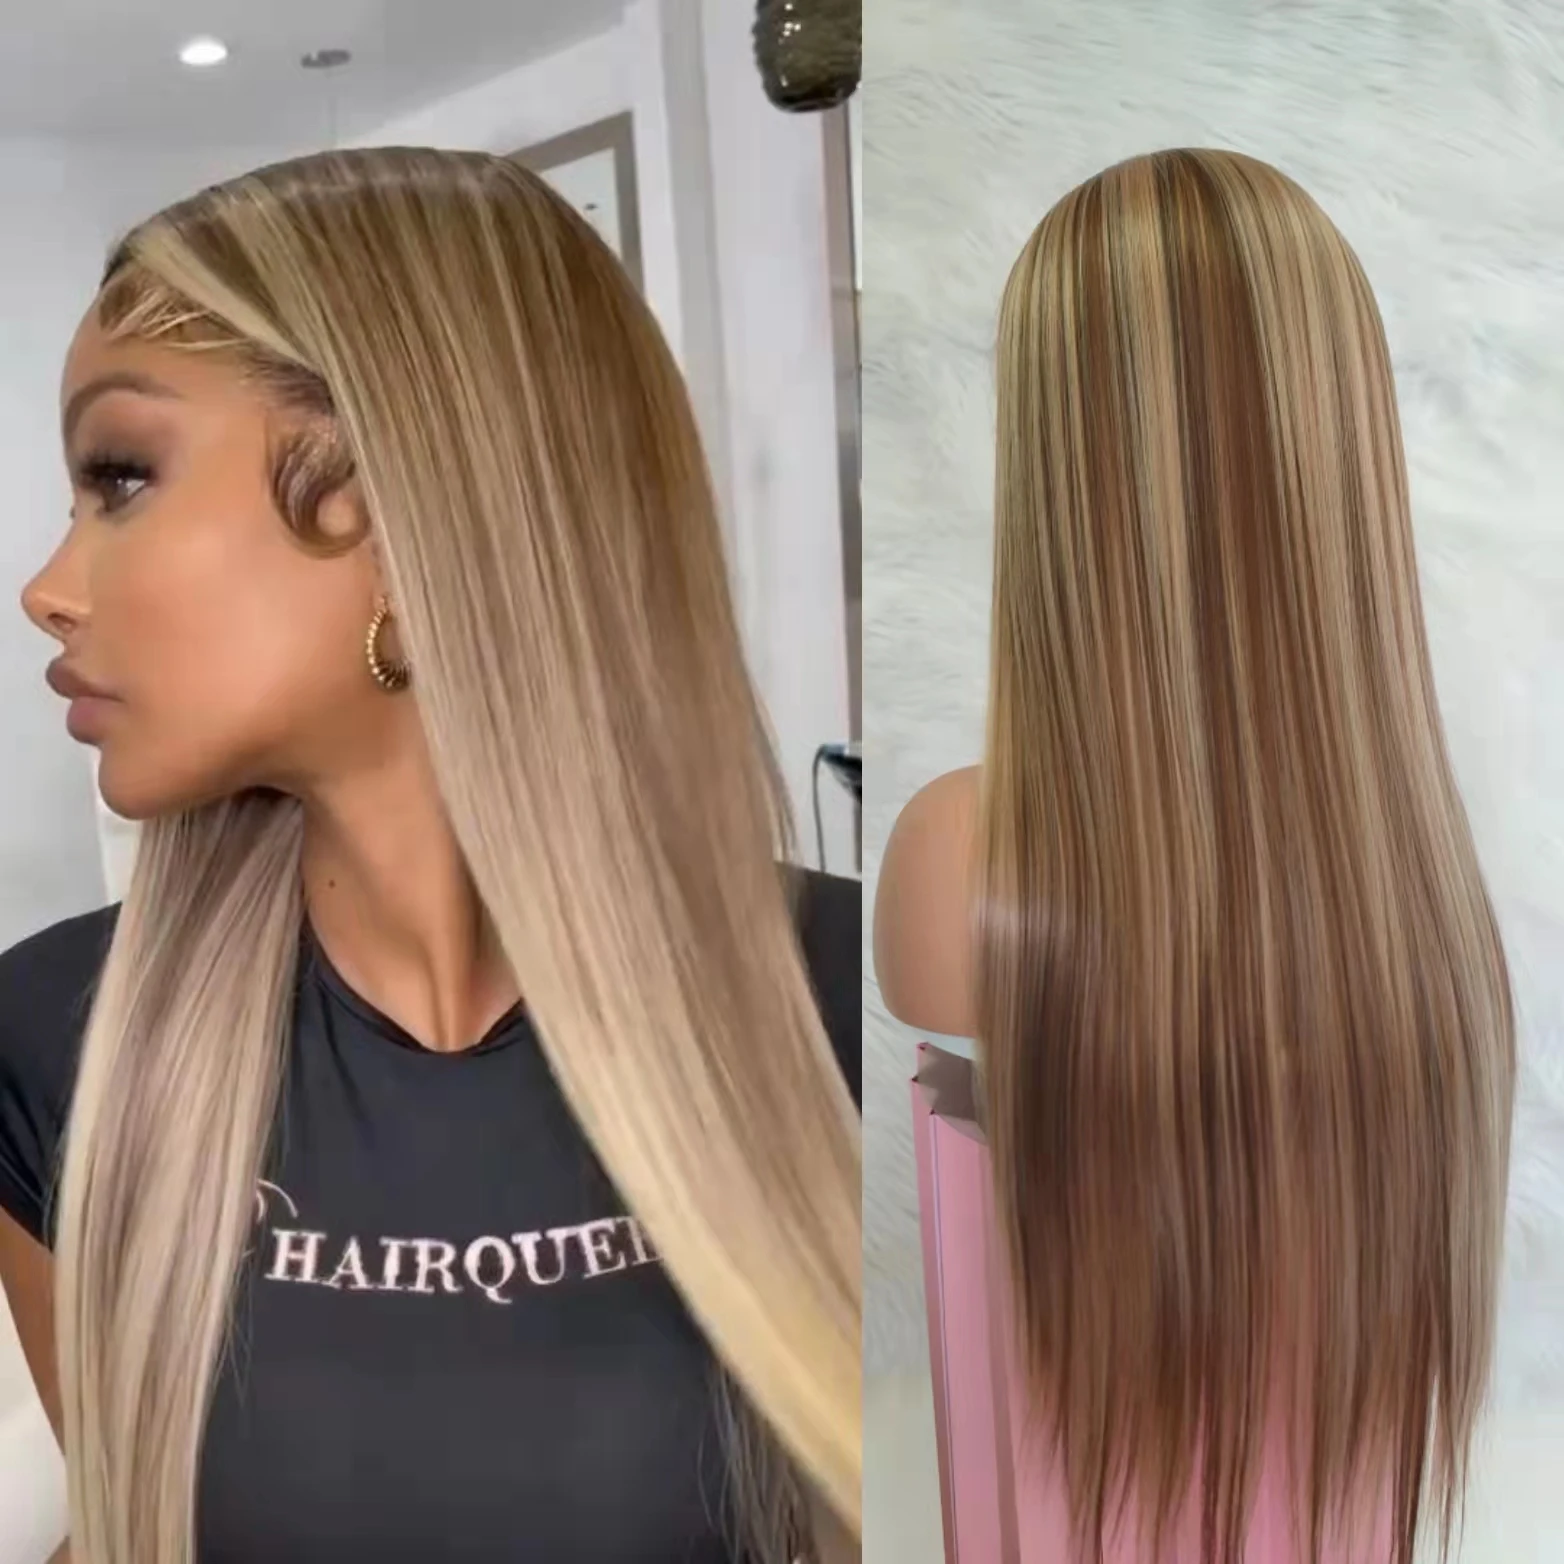 Long Straight Highlights Wig for Black Women Brown Mixed Blonde